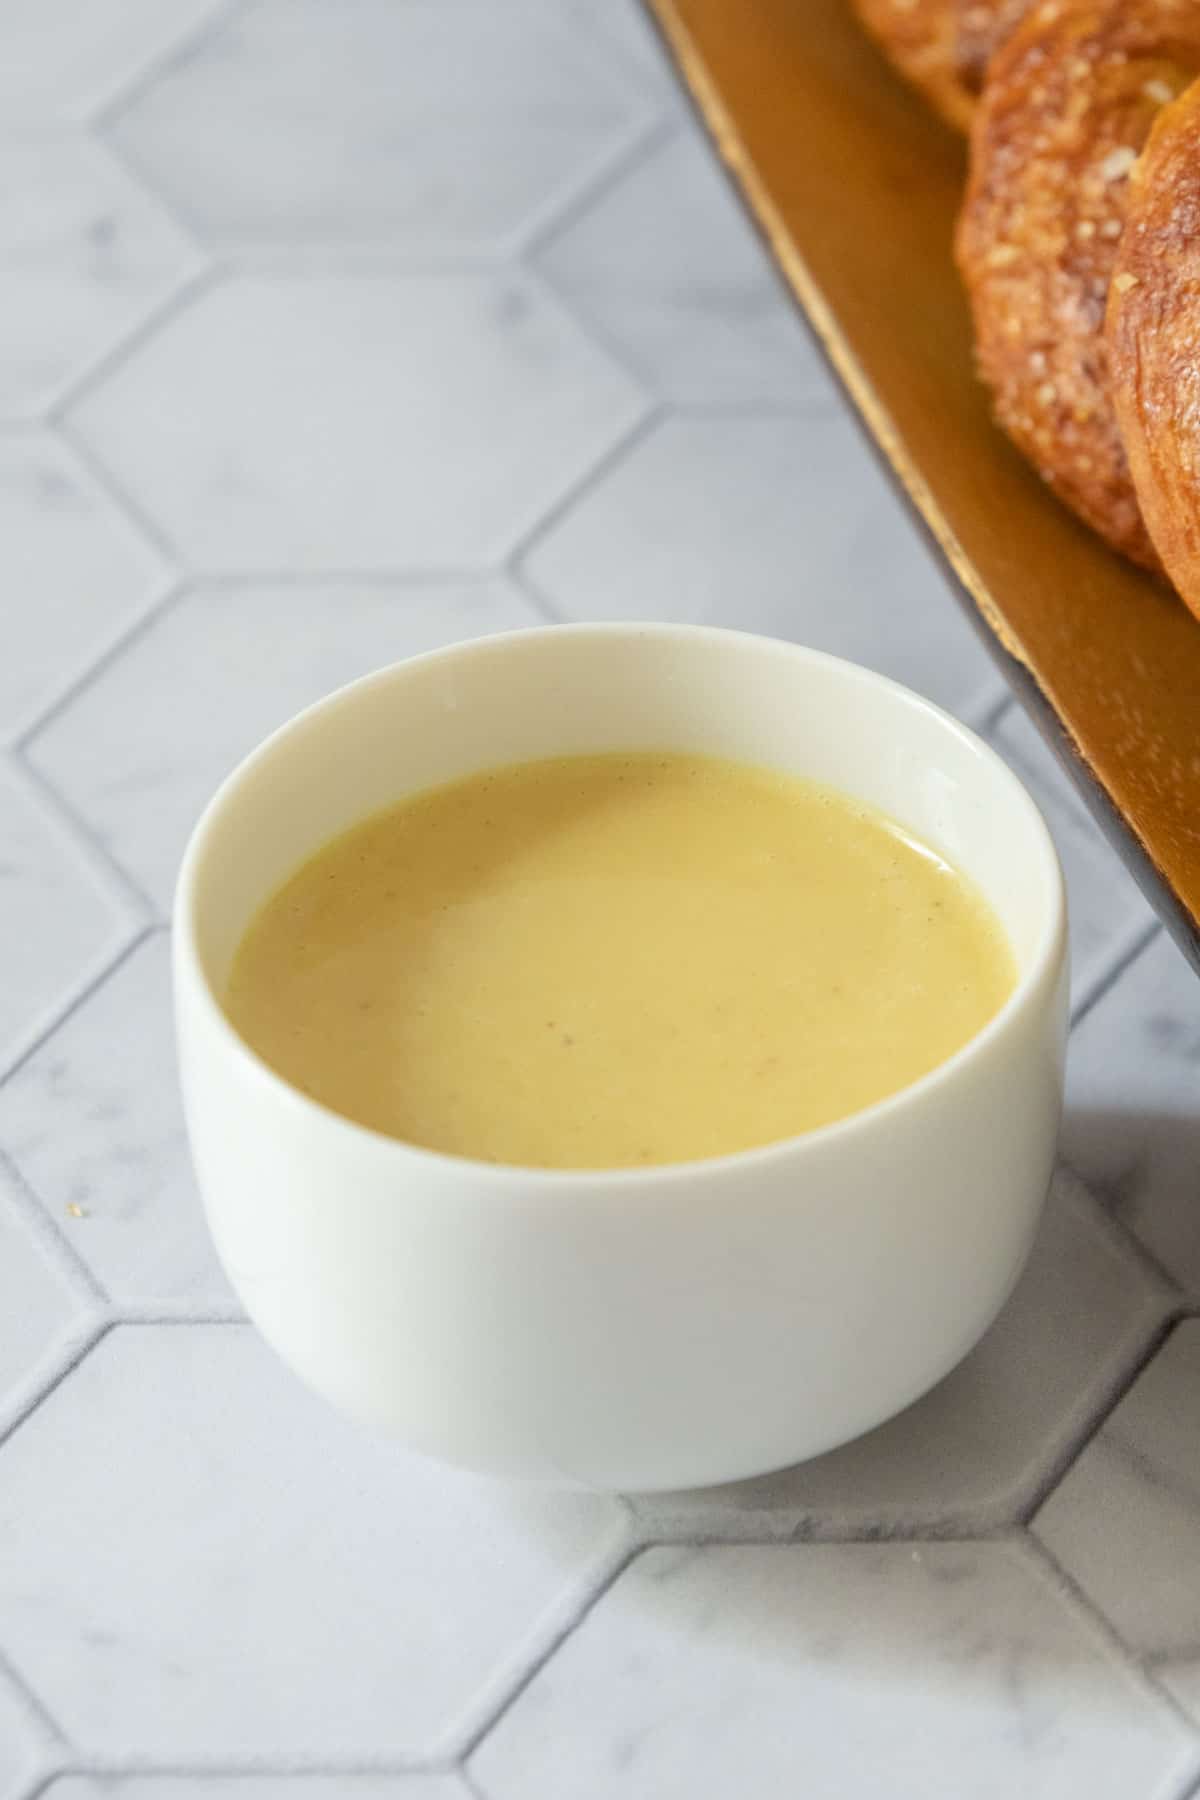 Small white bowl filled with honey mustard sauce.